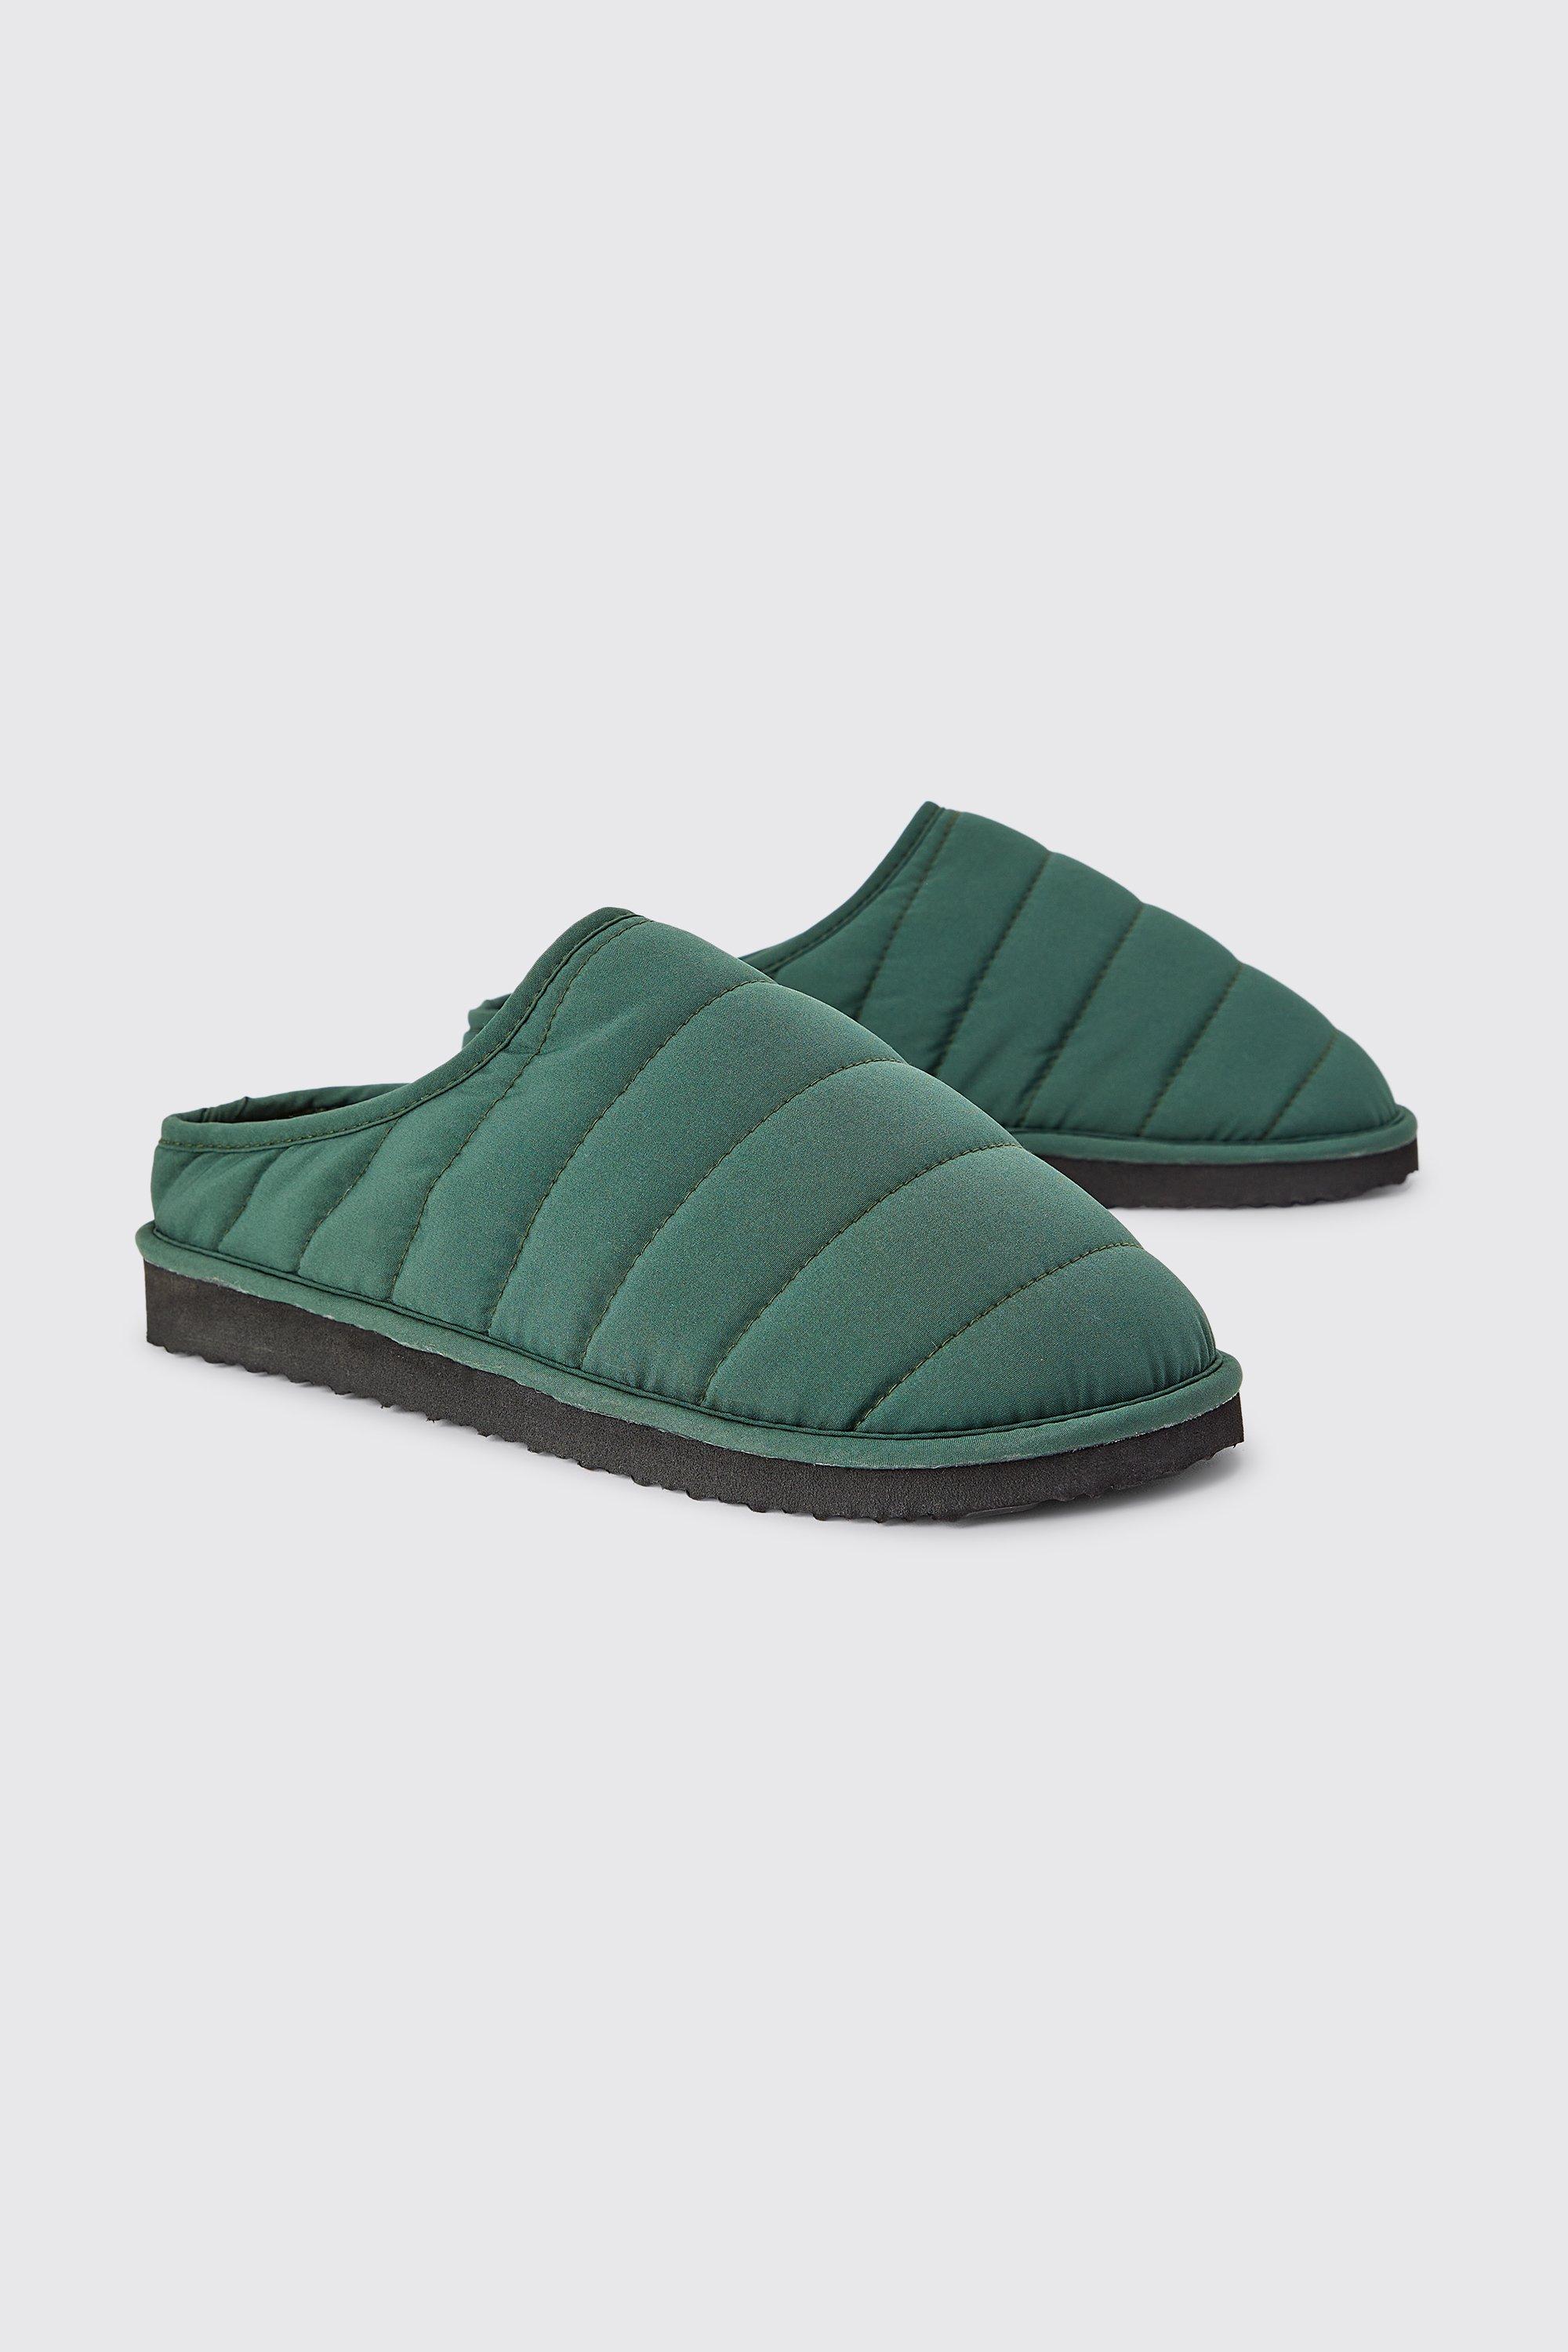 Mens Green Nylon Quilted Slippers, Green